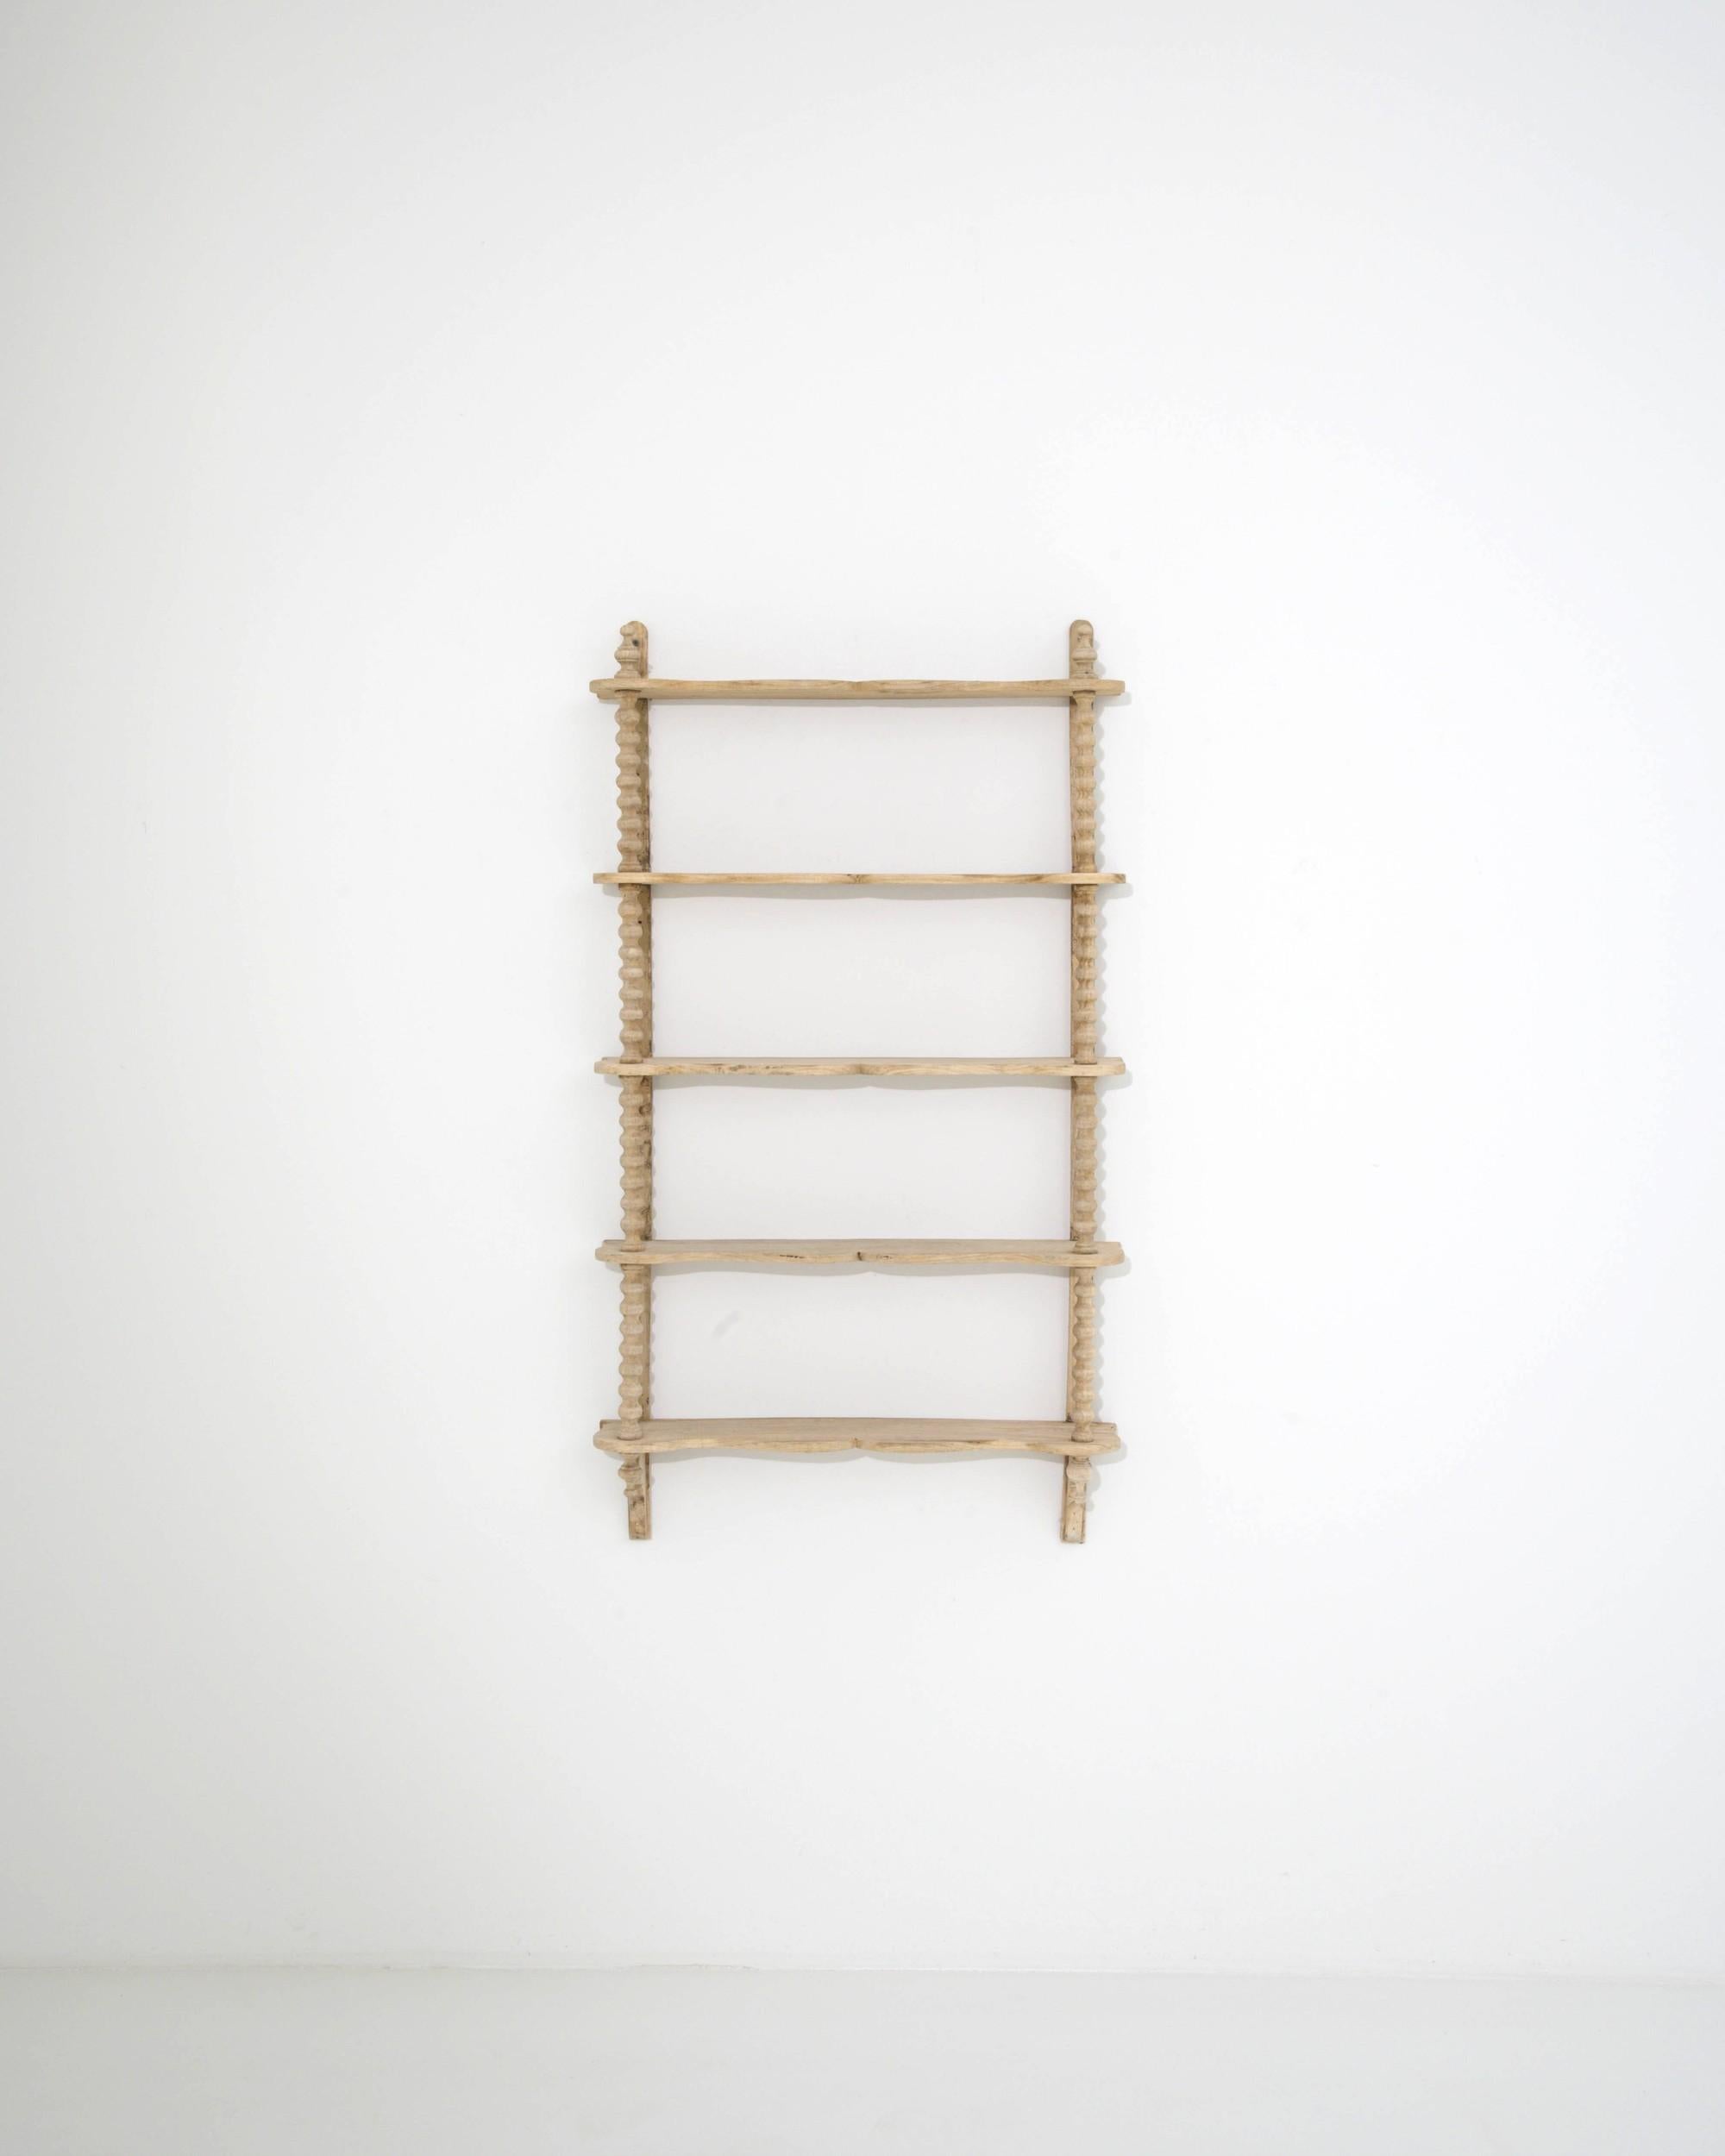 The design of this antique oak wall shelf ingeniously combines practicality with decorative charm. Built in France in the 1800s, the fresh natural finish of the restored wood and the light simplicity of the design speak to a Provincial sensibility: